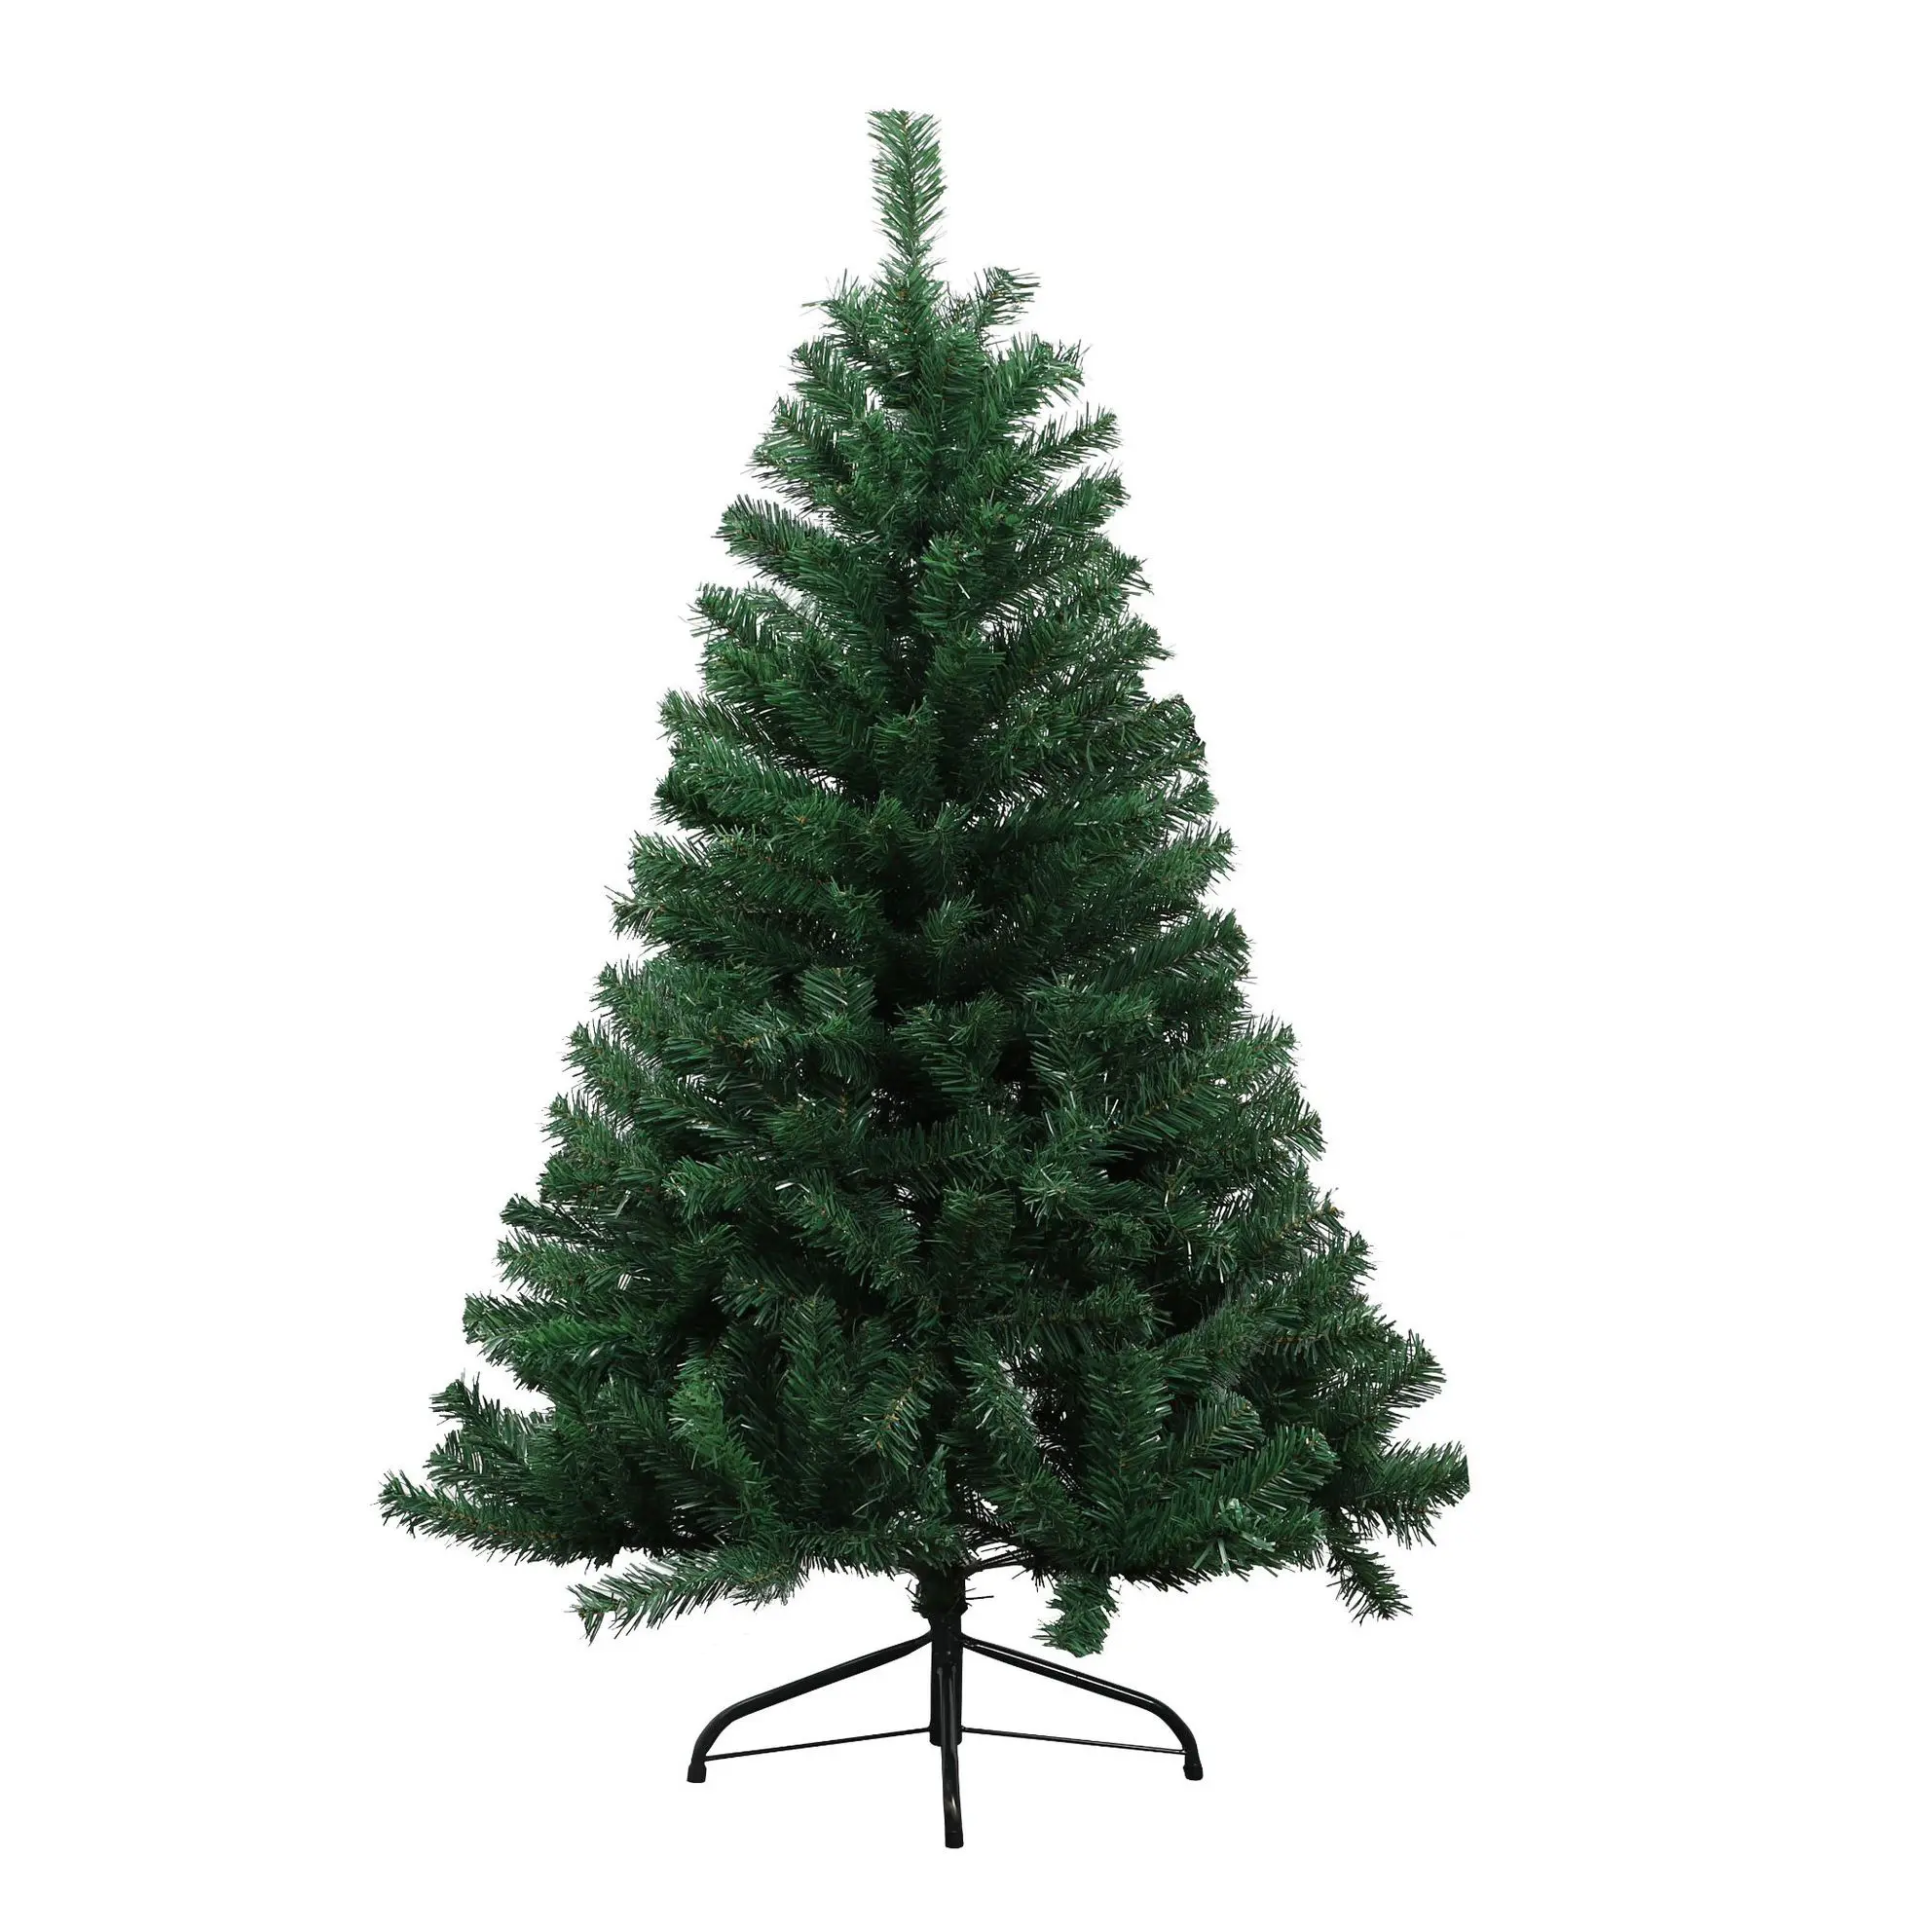 Home Office Shop Decoration Green Blue White Artificial Christmas Tree